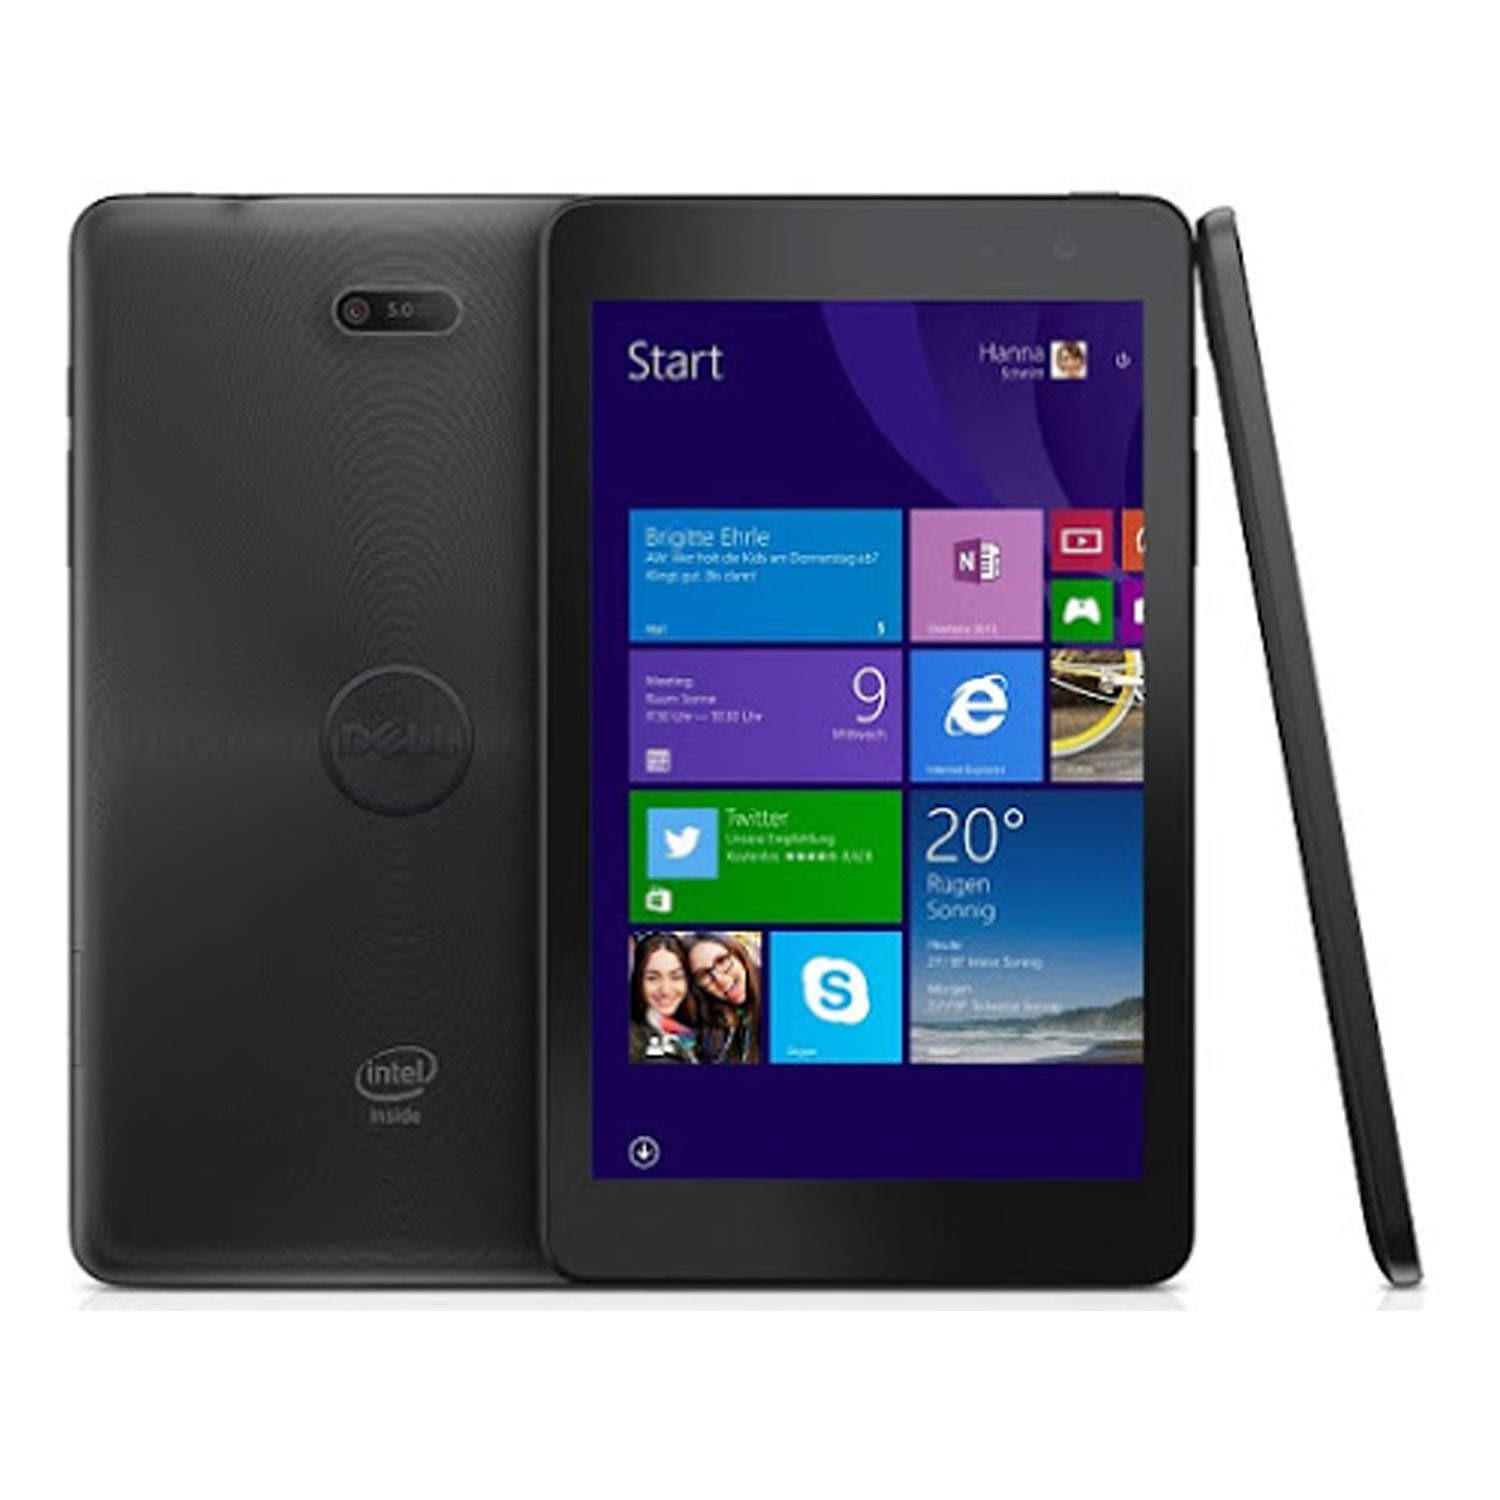 Dell Venue 8 Pro 3845 Intel Atom Z3735G 1GB 32GB 8 Inch IPS Windows 8.1  Tablet - White + 1 Year Office 365 Personal